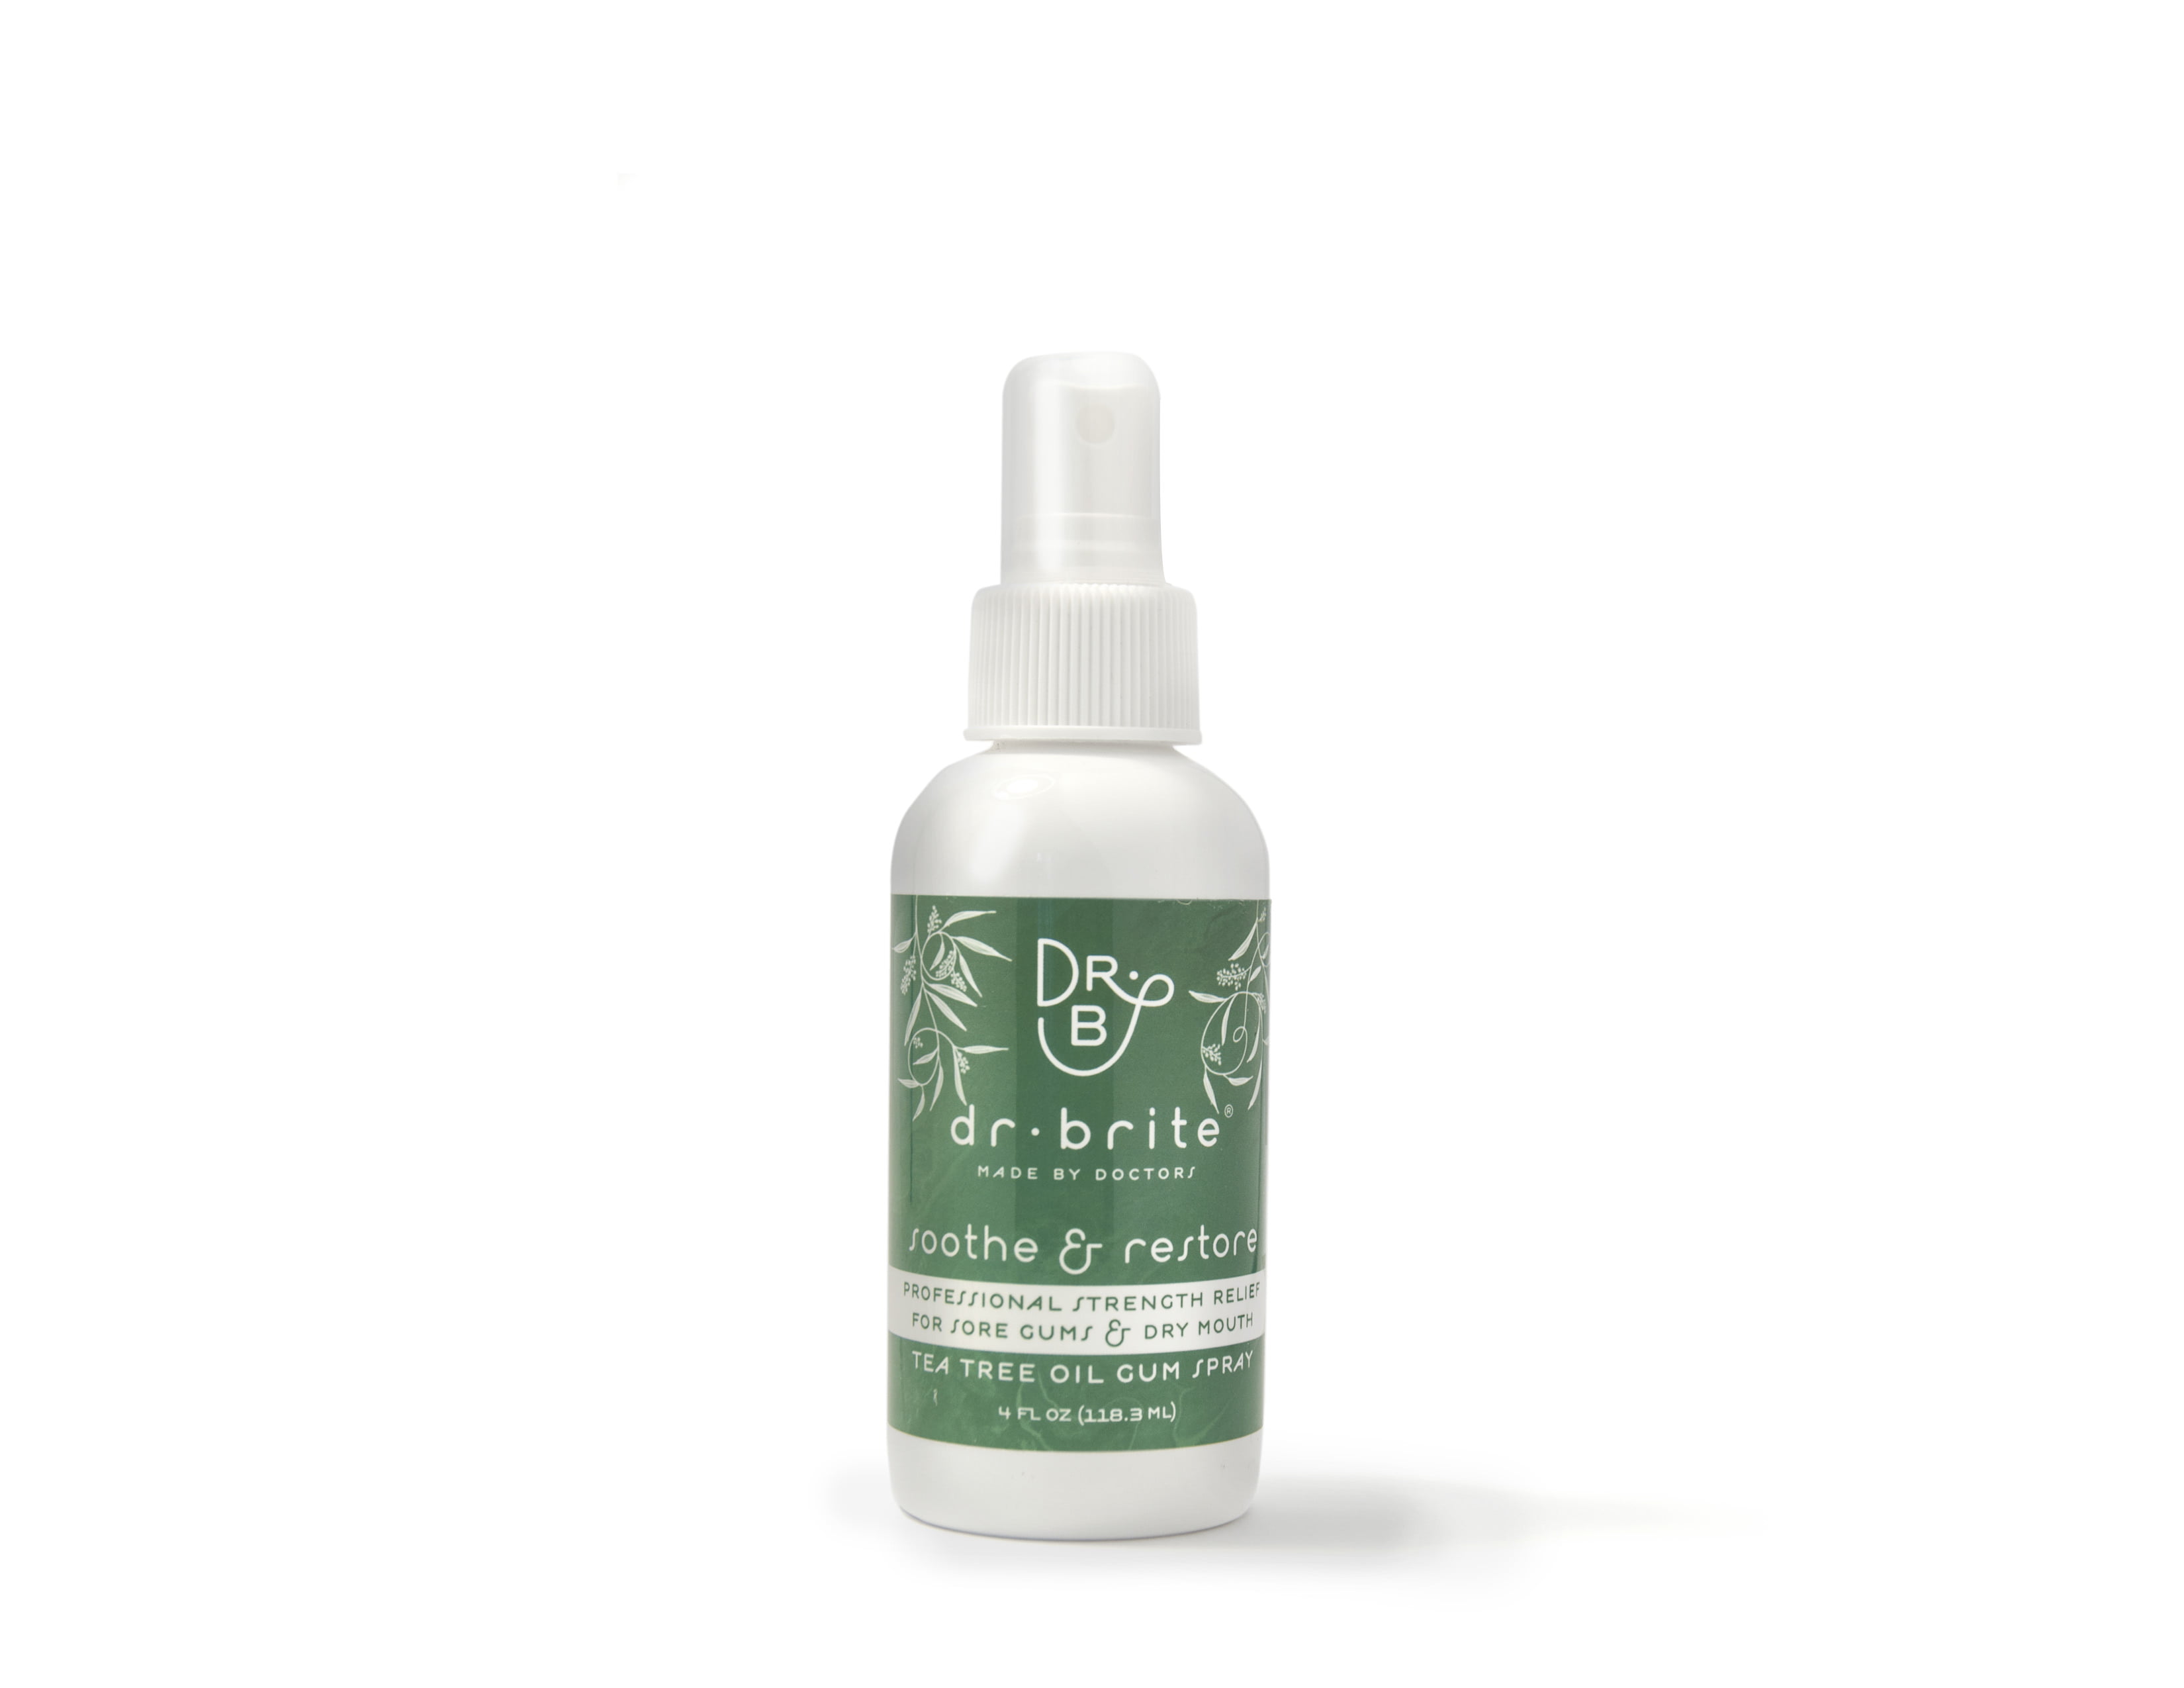 Miracle Brite Smile - 3% Hydrogen Peroxide MedicalFood Grade, Peppermint,  Lemon, Clove Leaf, Cinnamon and Rosemary. Organic Essential Oils Leaving a